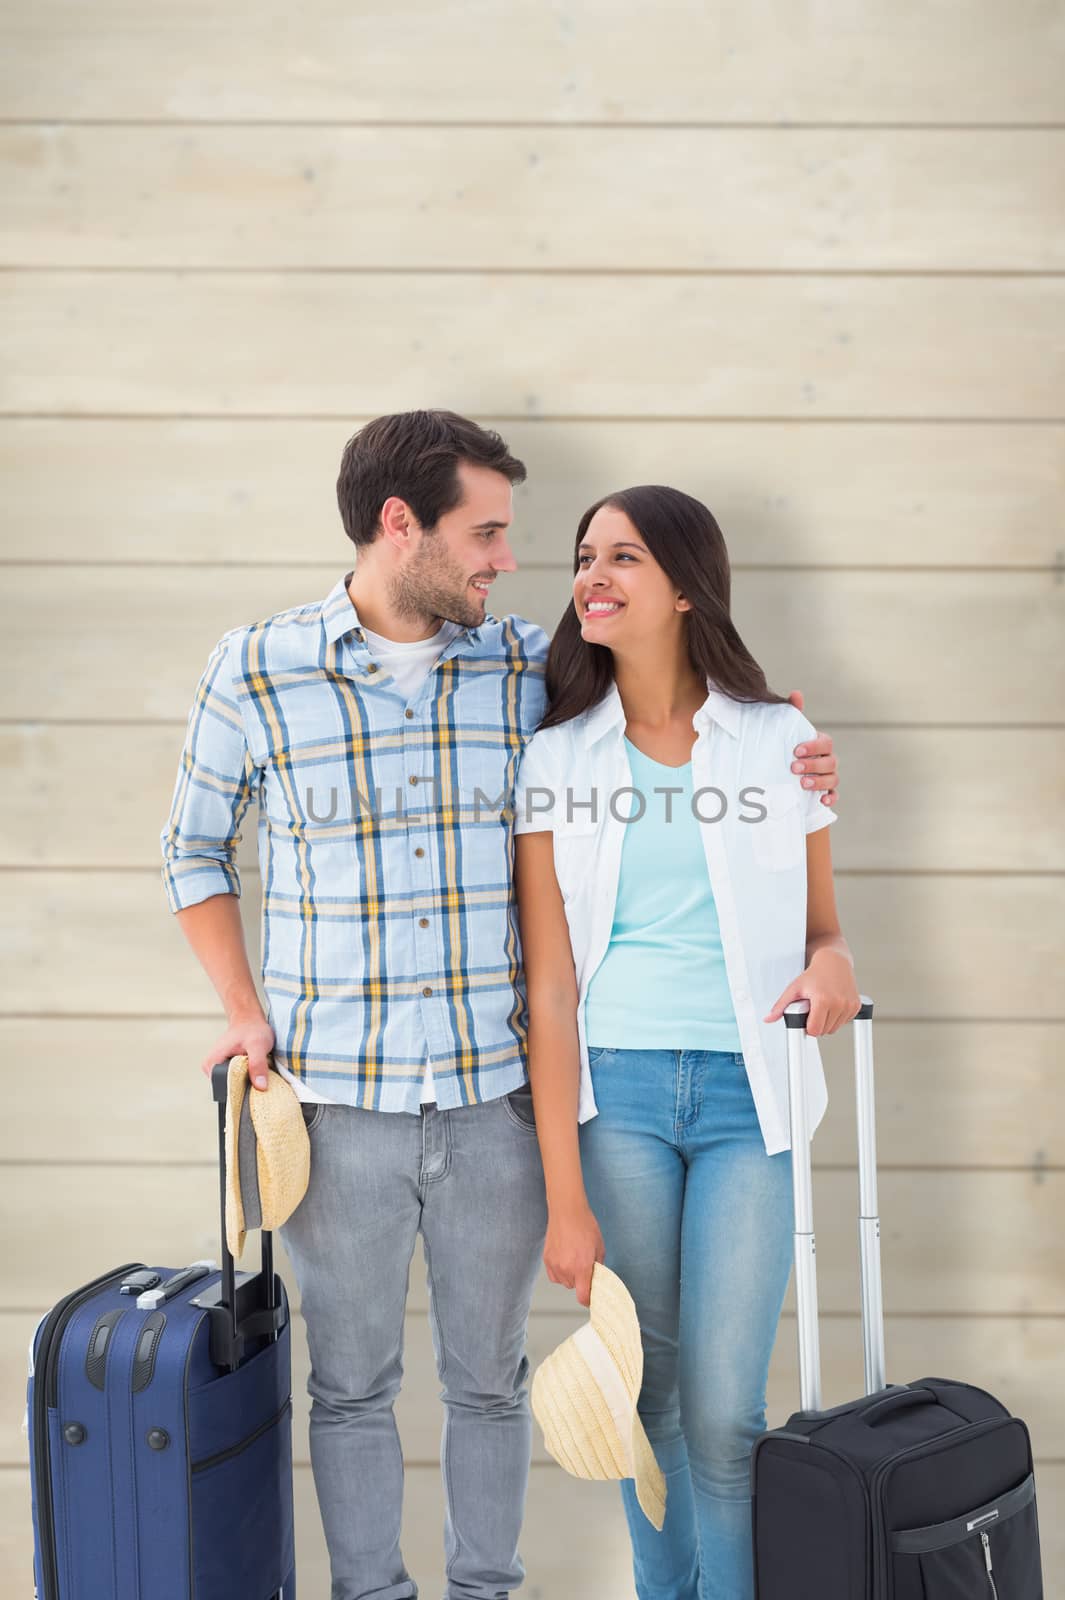 Attractive young couple going on their holidays against wooden planks